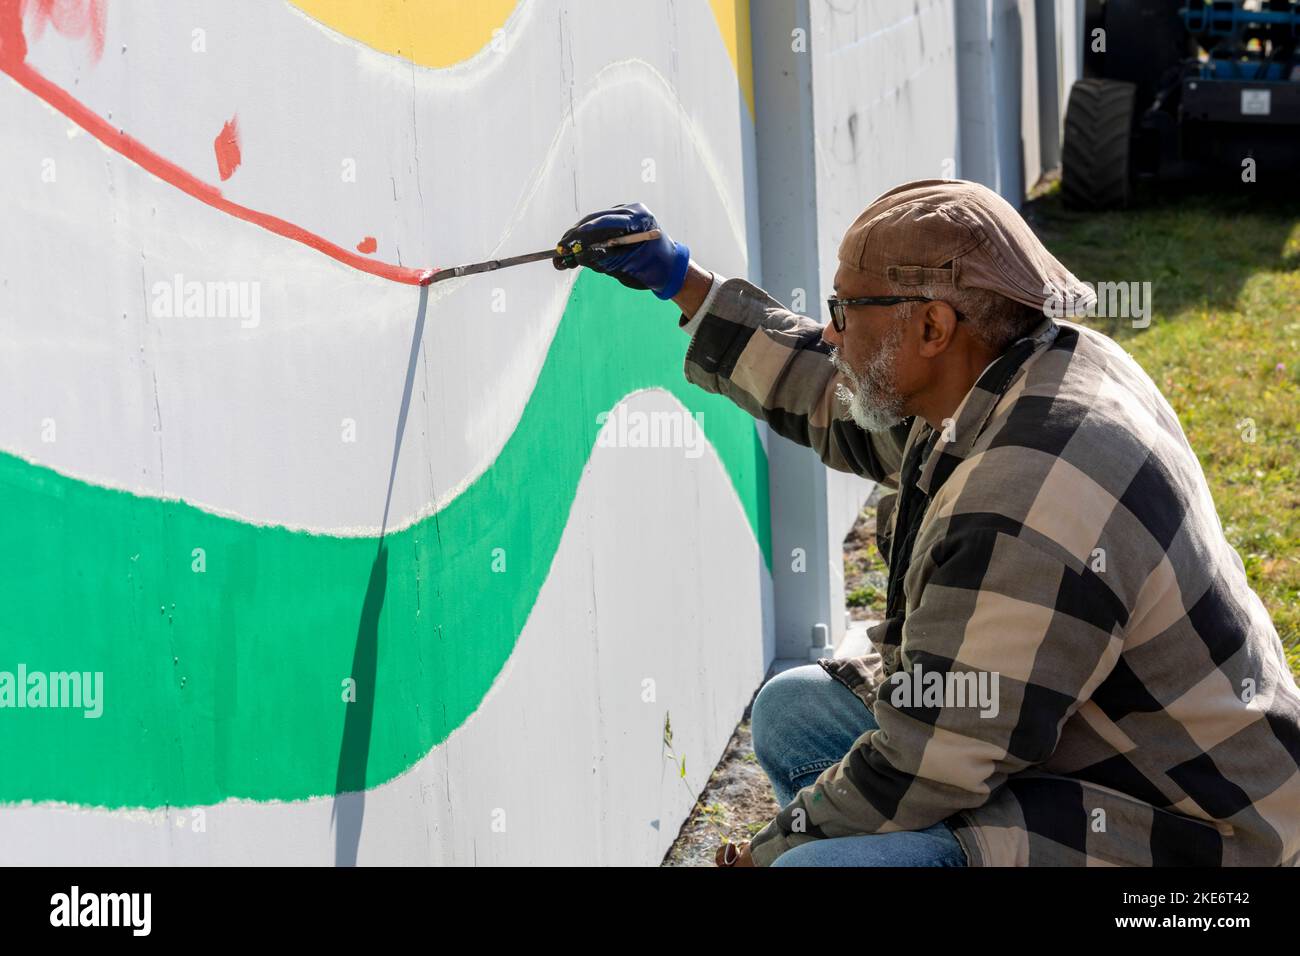 Detroit, Michigan - A block-long mural, designed by artist Hubert Massey, being painted on the sound barrier around the Stellantis Jeep plant. Part of Stock Photo